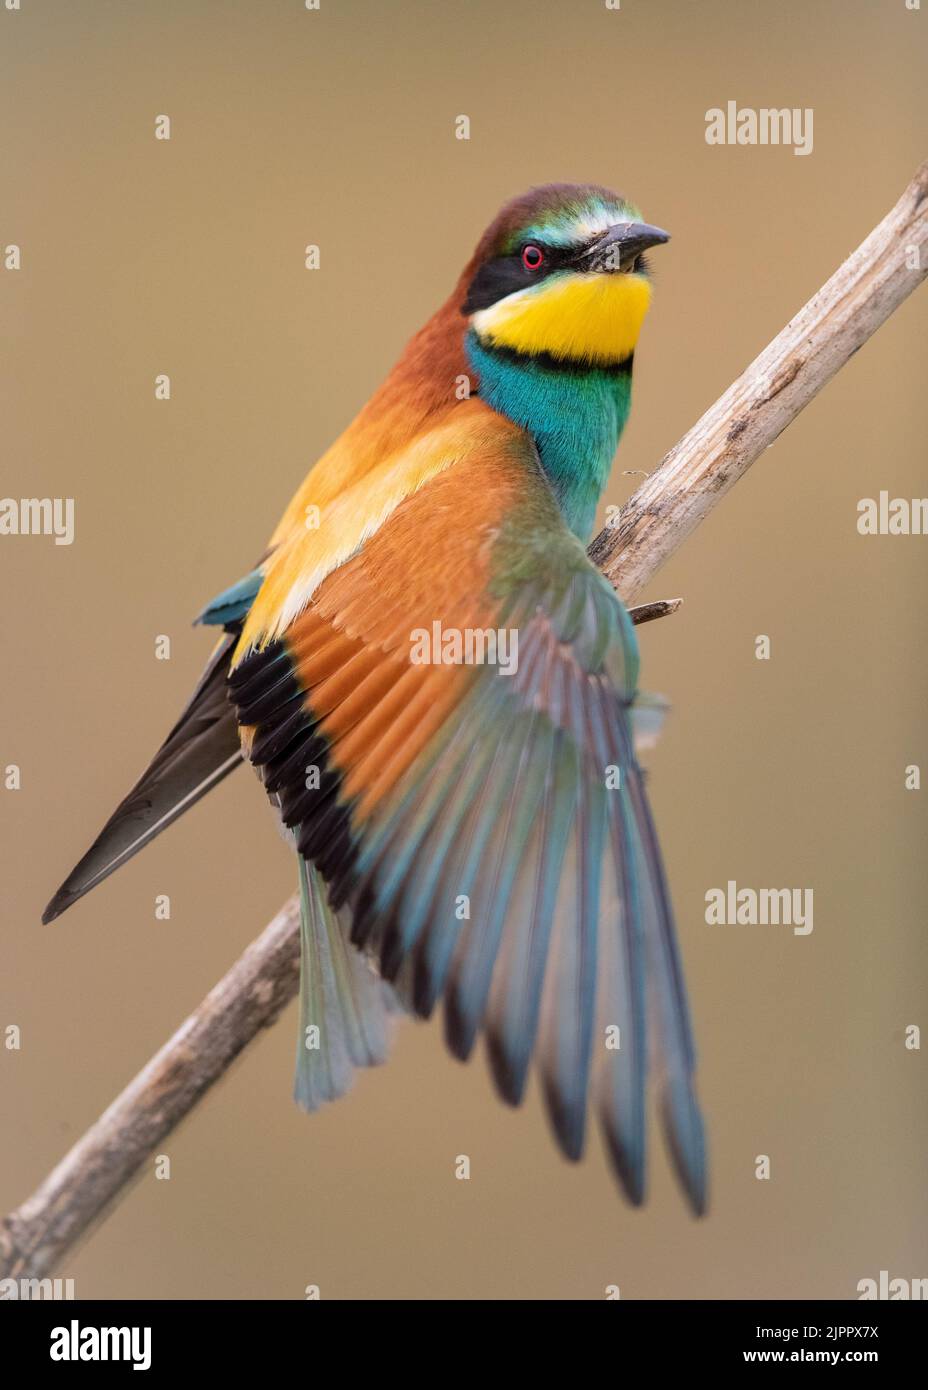 European Bee-eater (Merops apiaster) perching on a branch and stretching its wingt. Koros-Maros National Park, Hungary Stock Photo